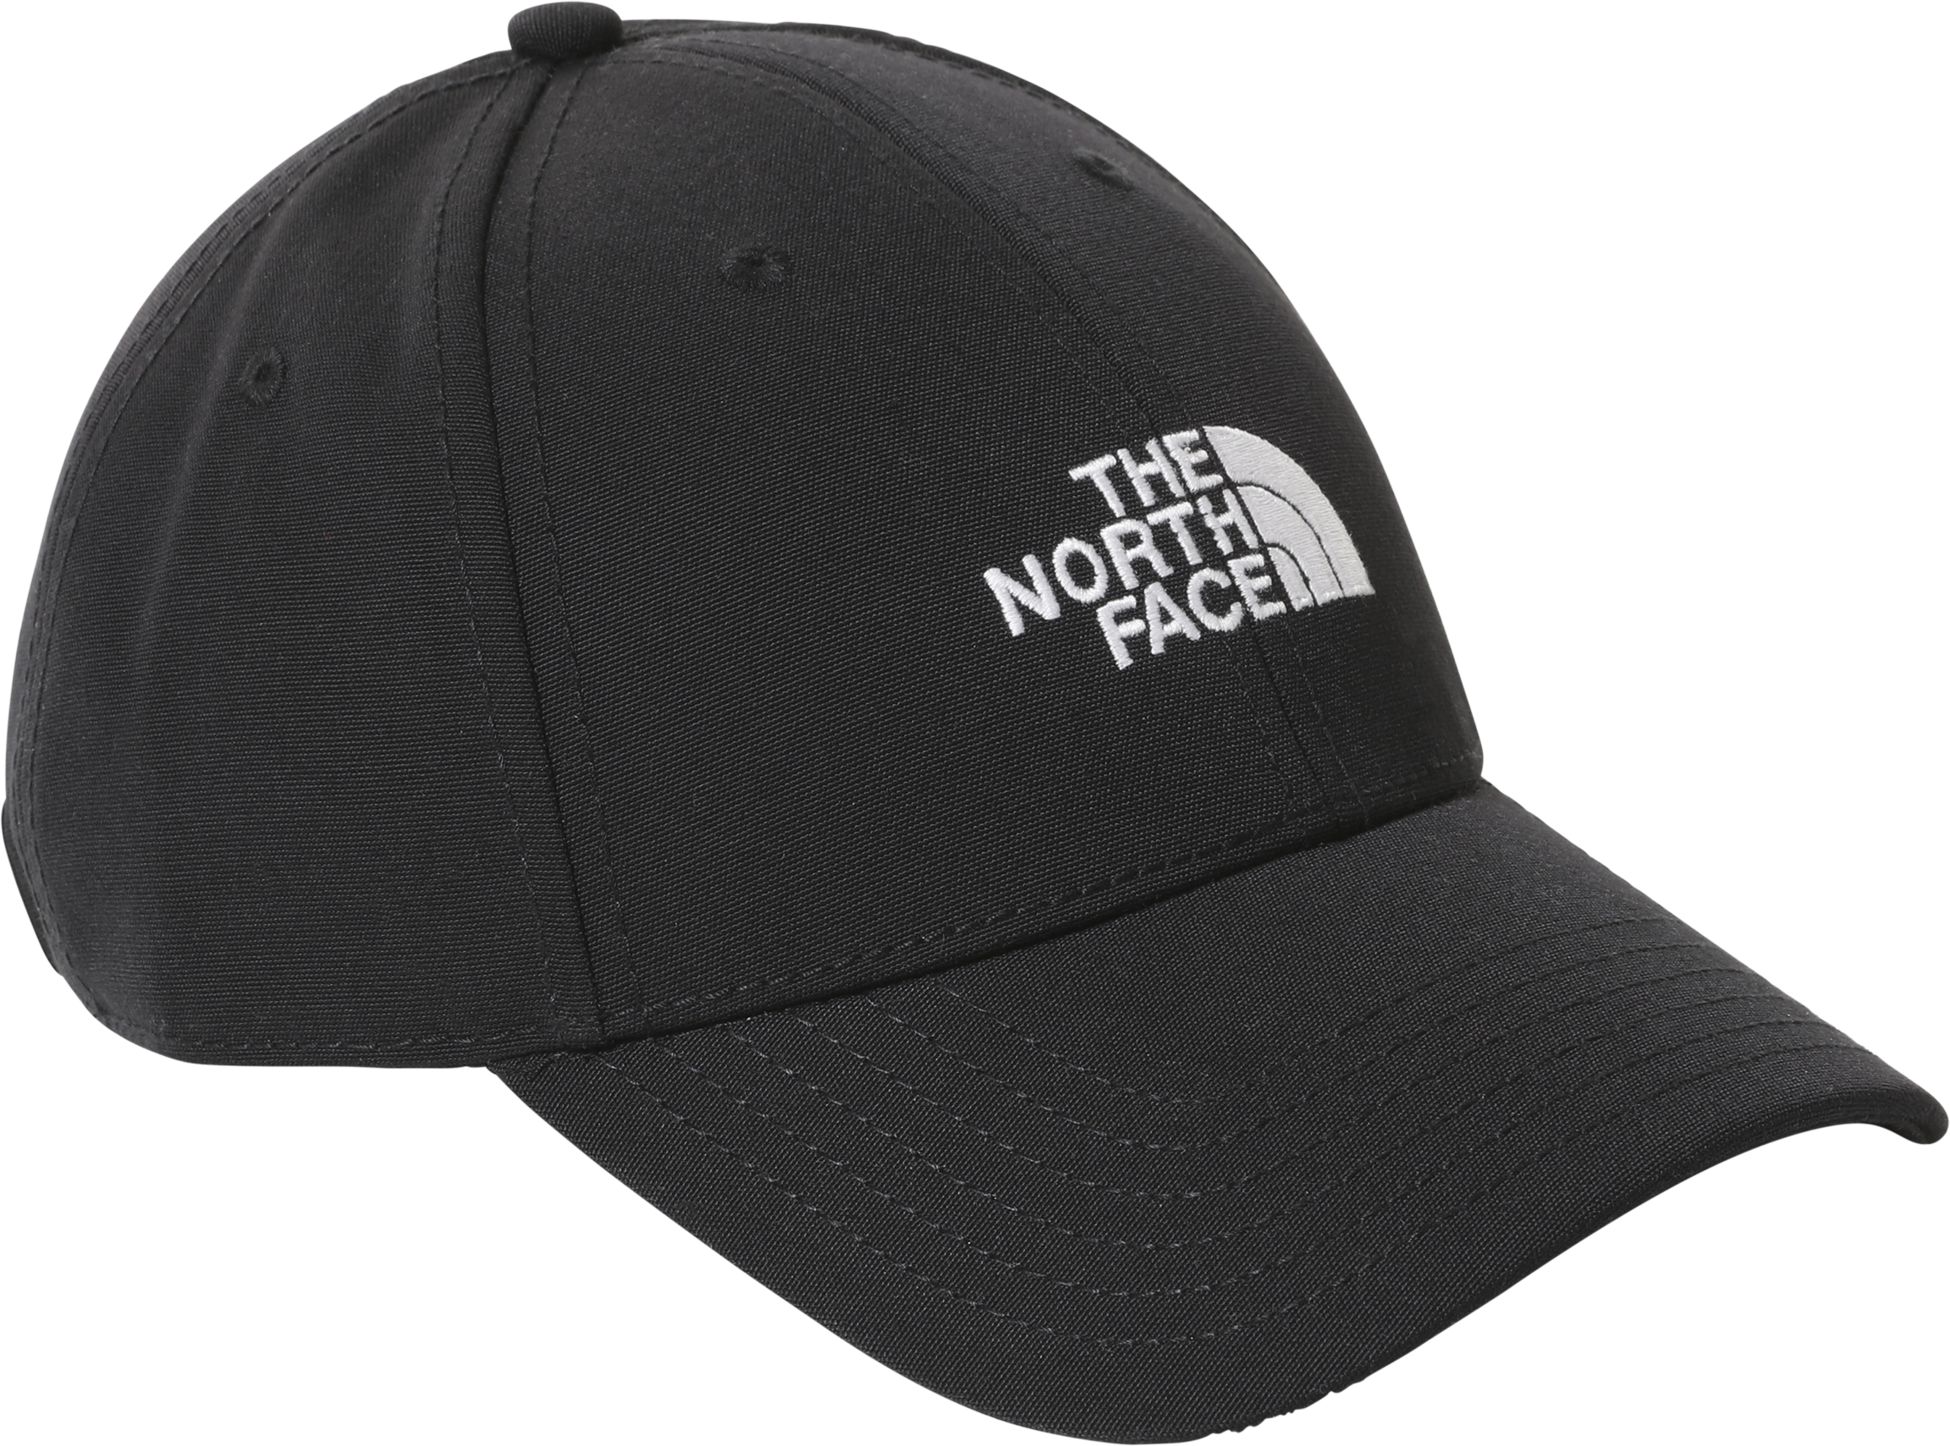 THE NORTH FACE, RCYD 66 CLASSIC HAT